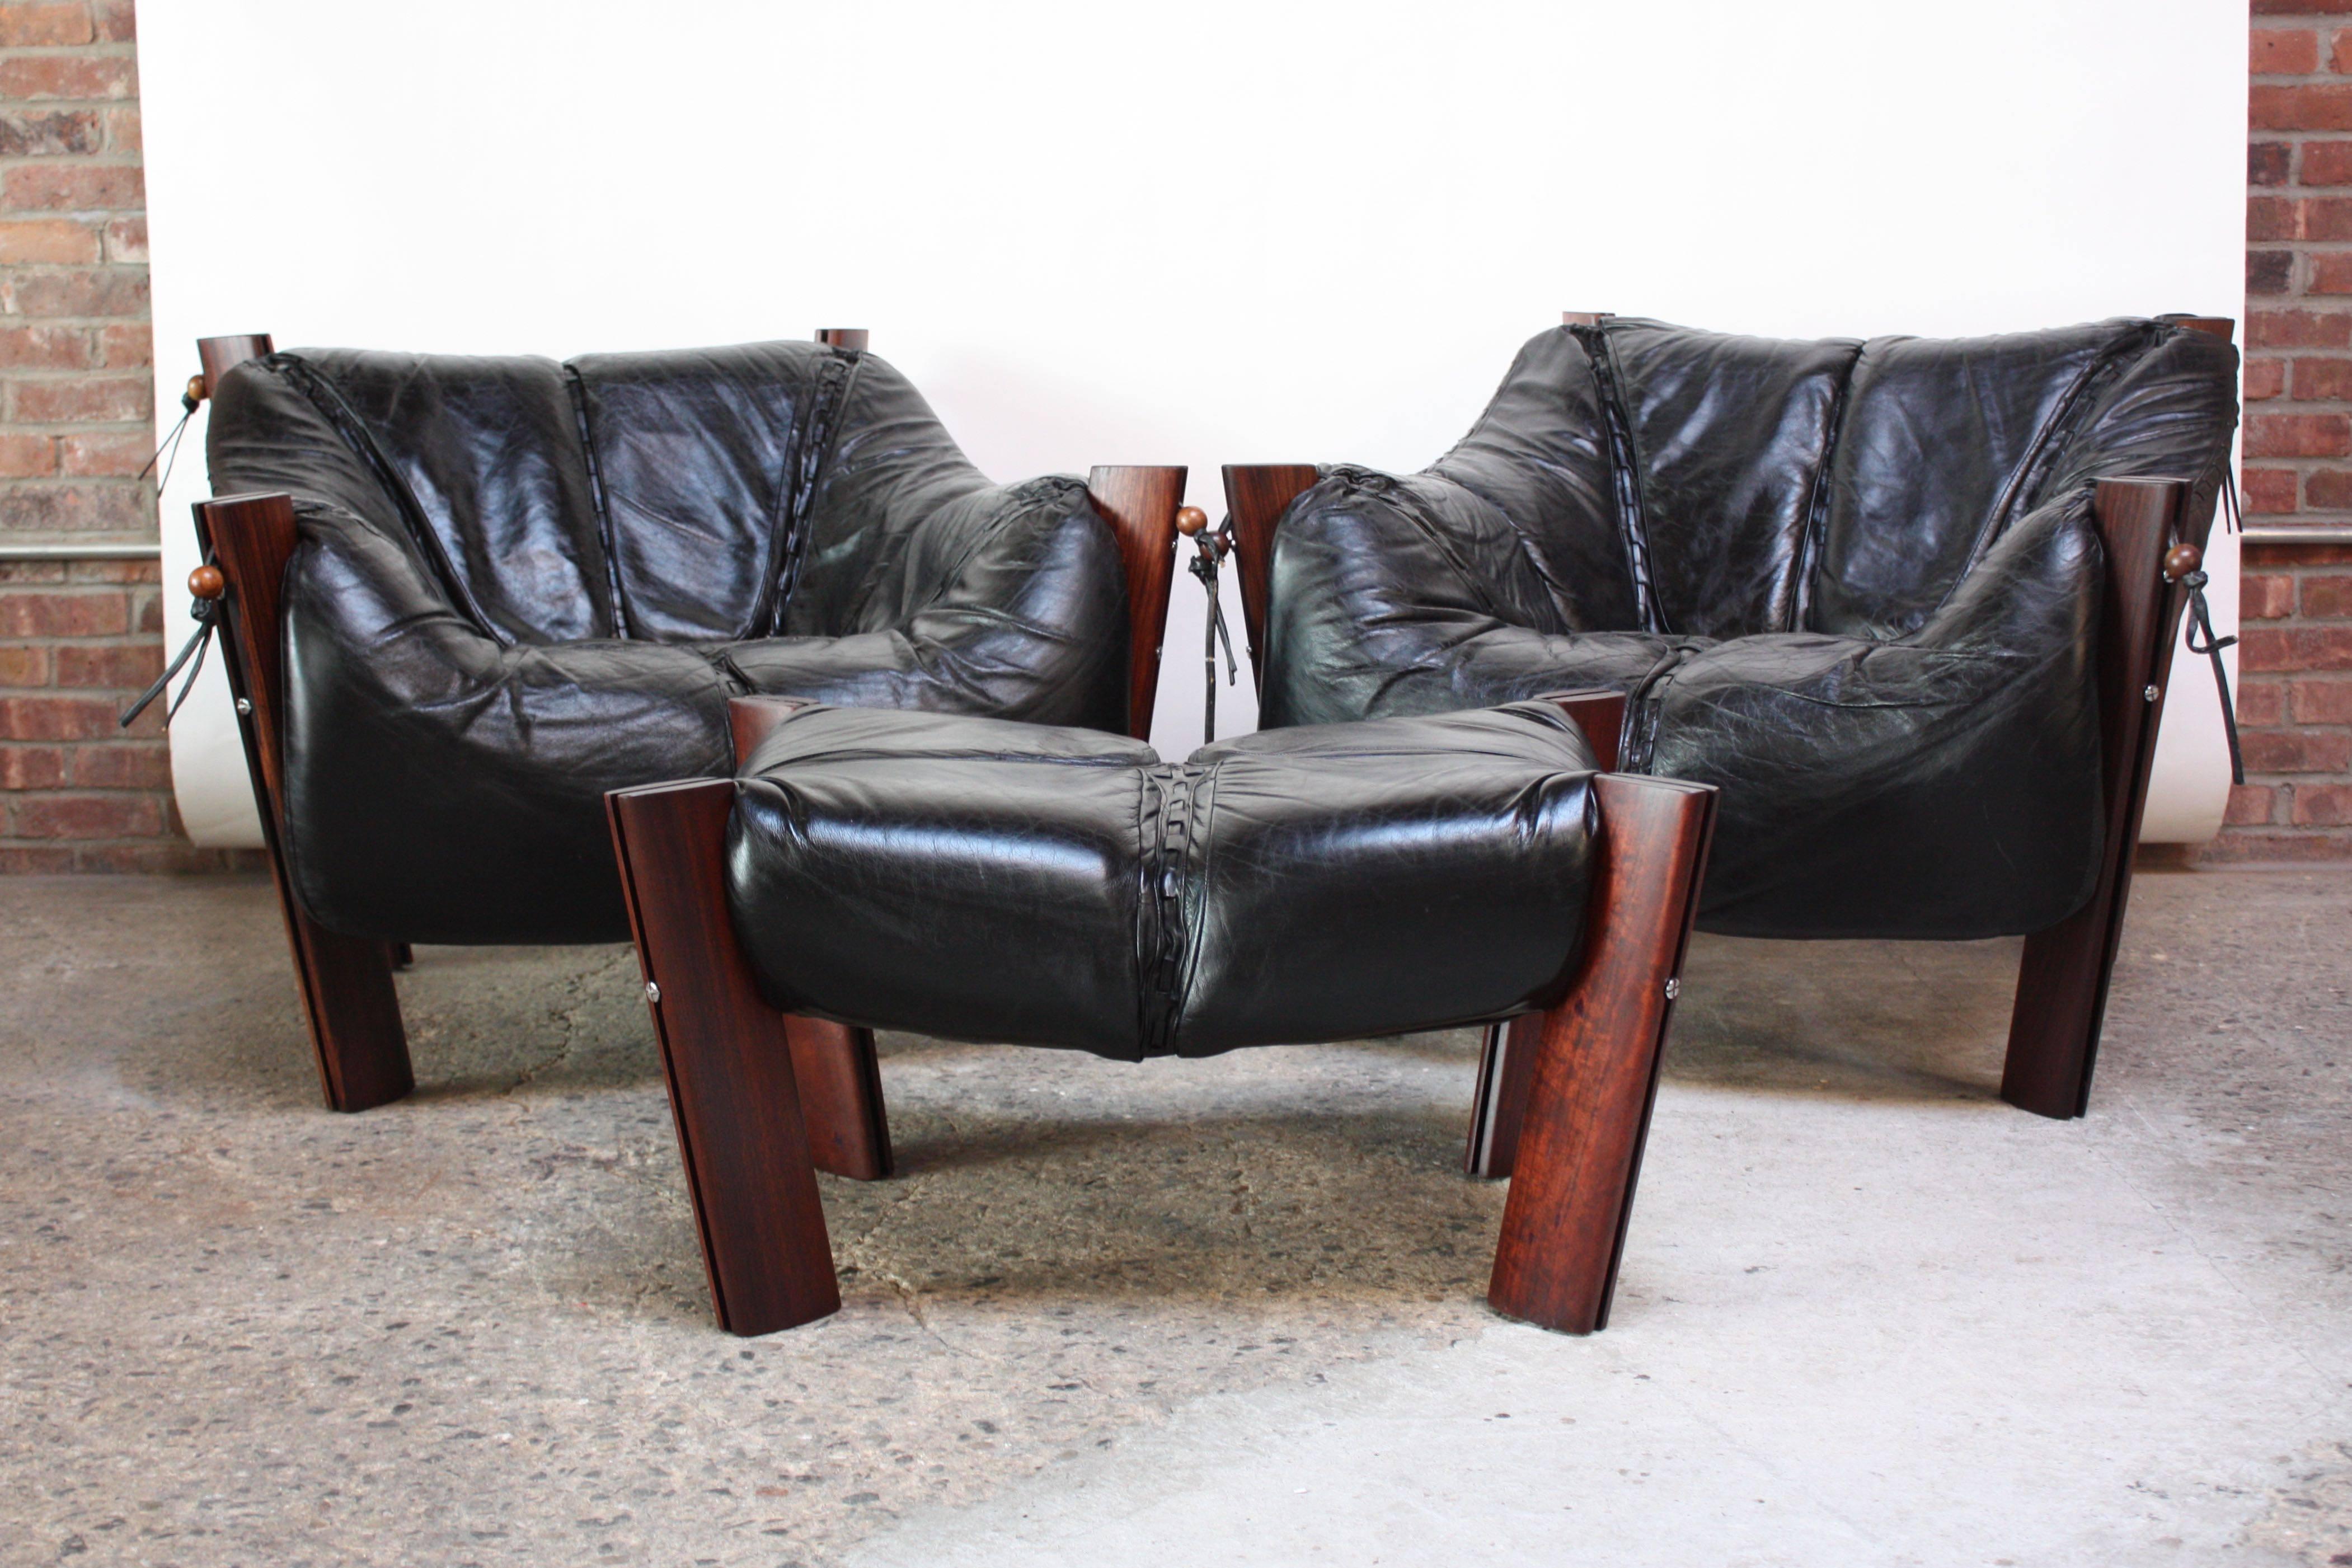 Set of two lounge chairs and one ottoman designed by Percival Lafer in Sao Paolo, Brazil in 1975. Leather 'sling' seats are supported by steel enforced jacaranda posts. Round rosewood beads and leather ties re-enforce the seats to the posts and add